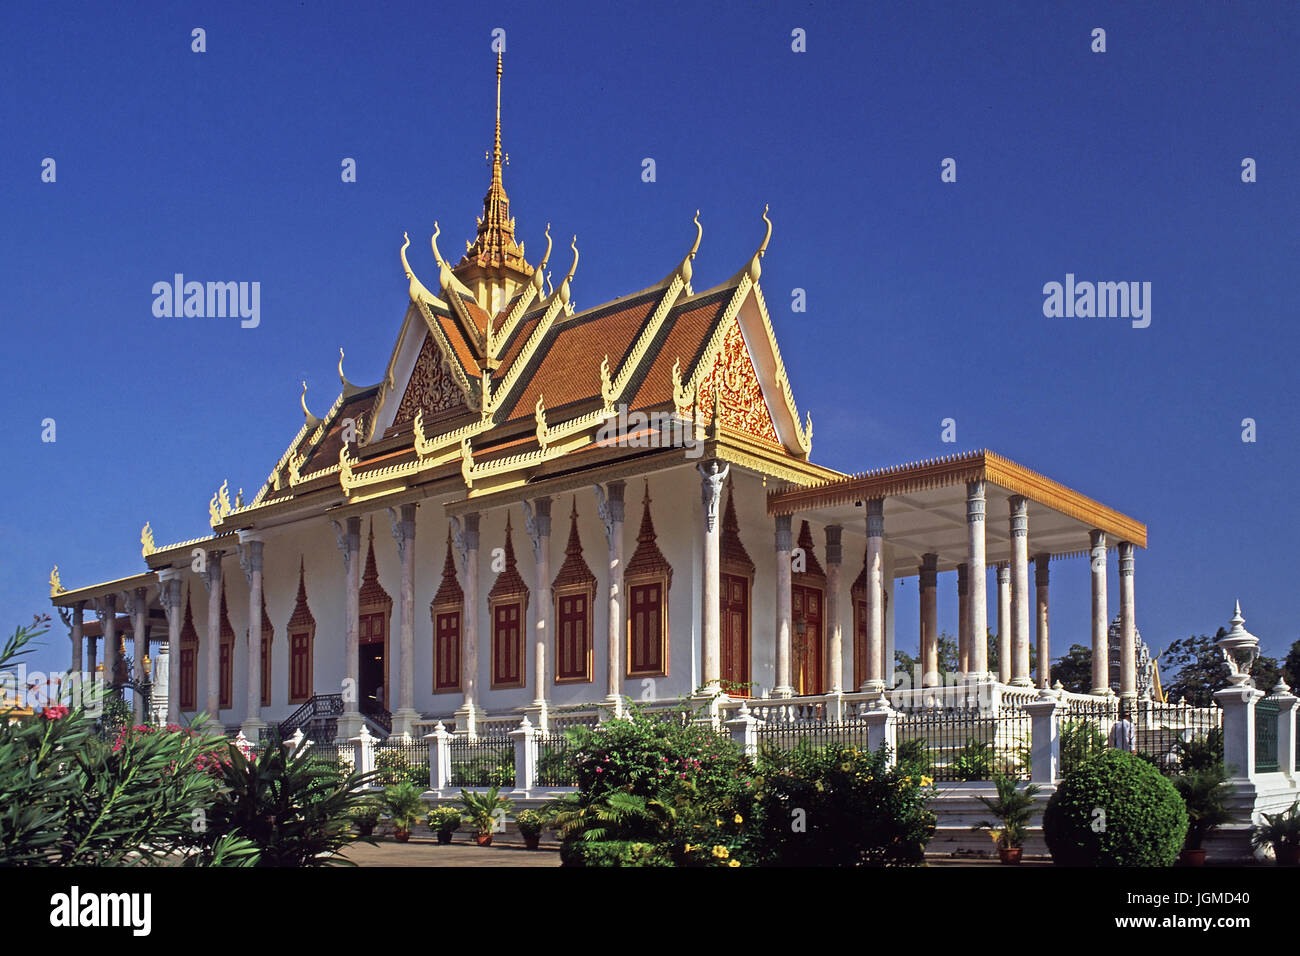 The royal palace in Pnom Penh, the Silver Pagoda, Der koenigliche Palast in Pnom Penh Stock Photo